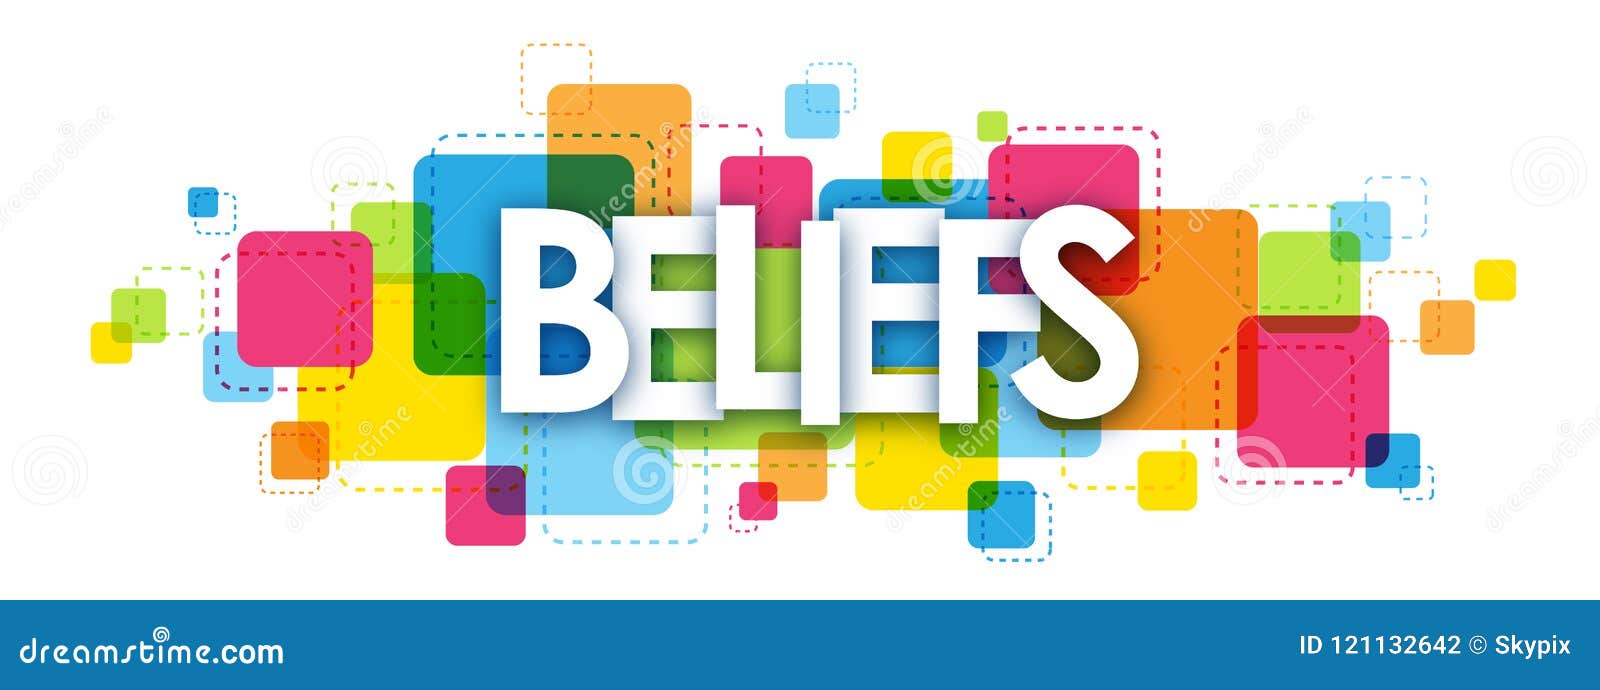 beliefs banner on colorful squares background